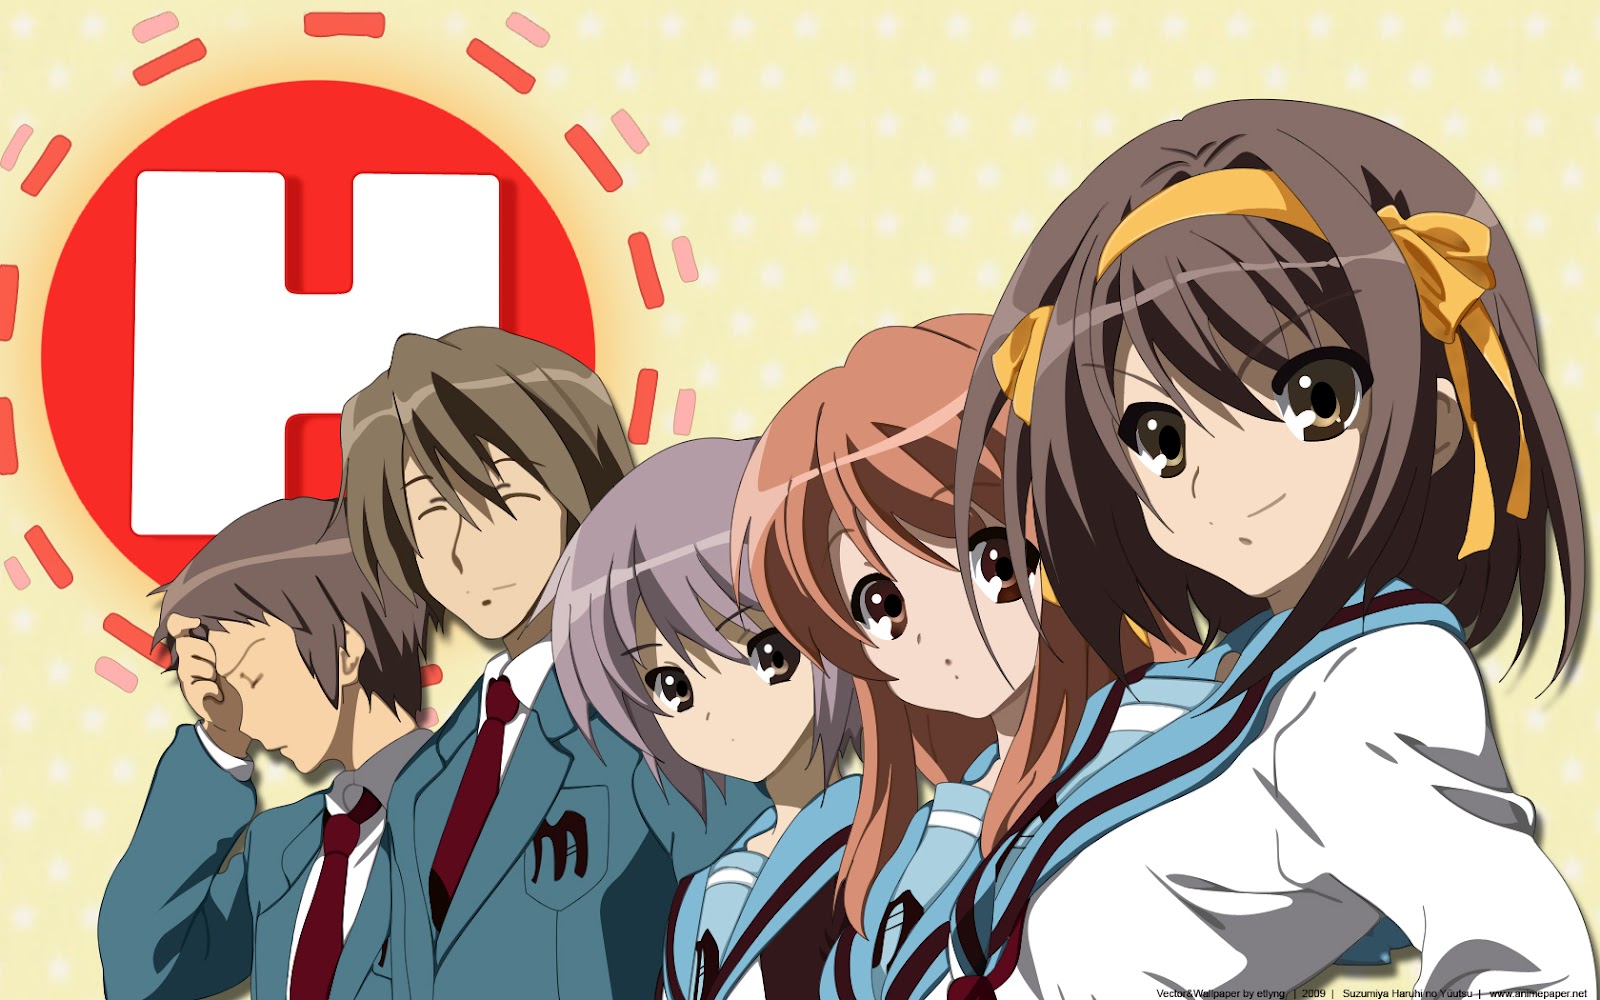 My Fave is Problematic: The Melancholy of Haruhi Suzumiya - Anime Feminist